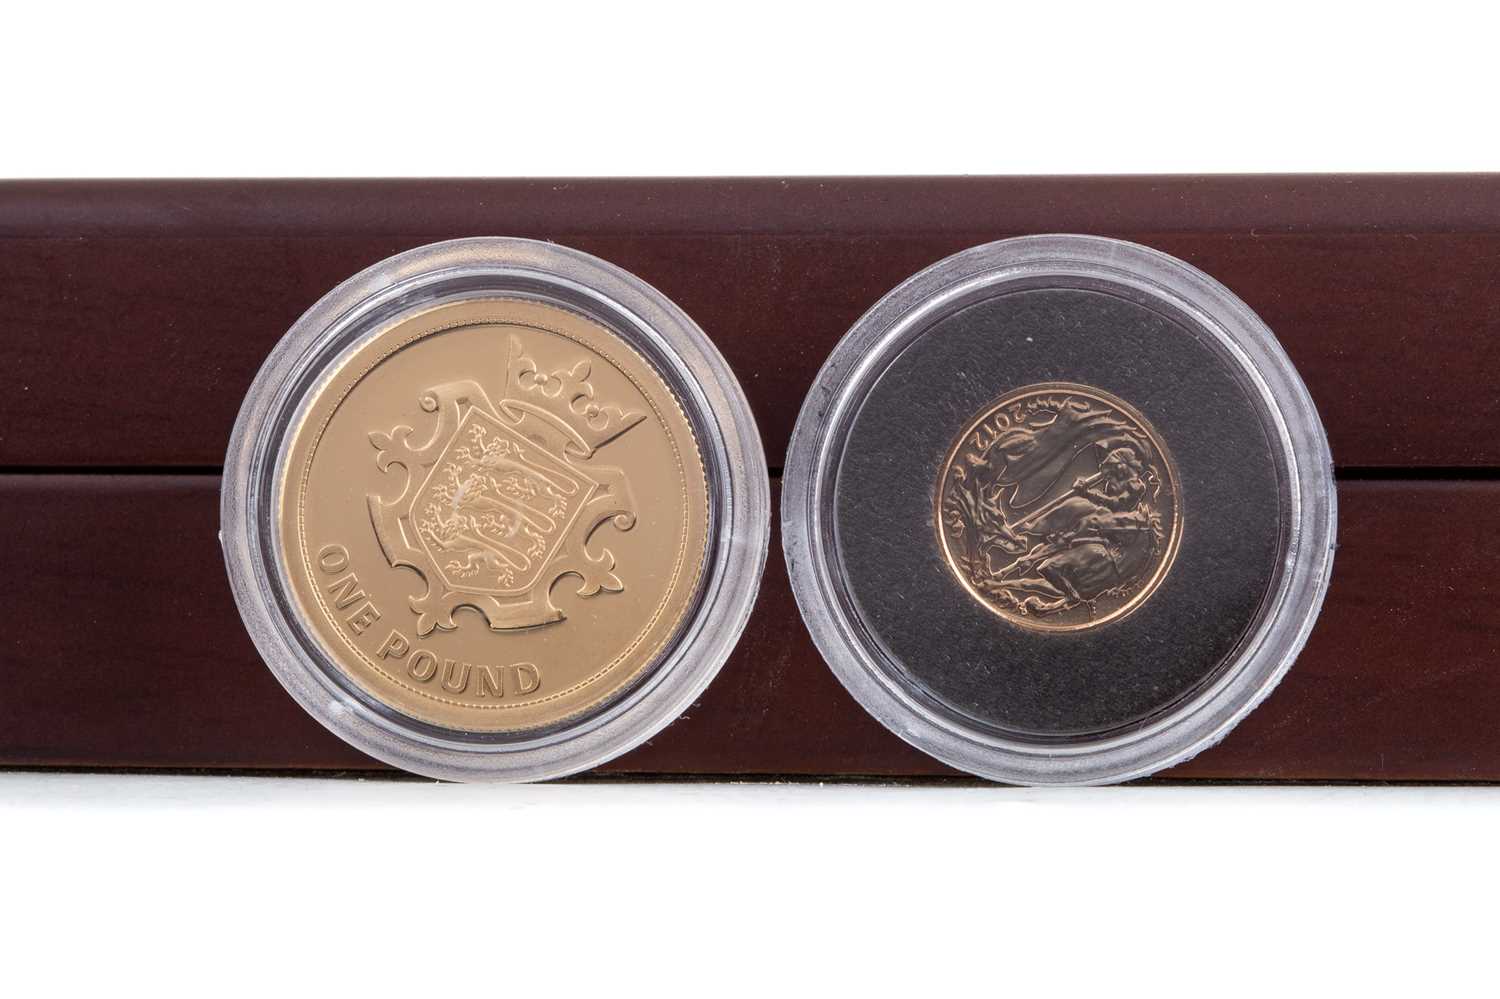 Lot 2 - A GOLD PROOF ONE POUND COIN AND A 2012 QUARTER GOLD SOVEREIGN